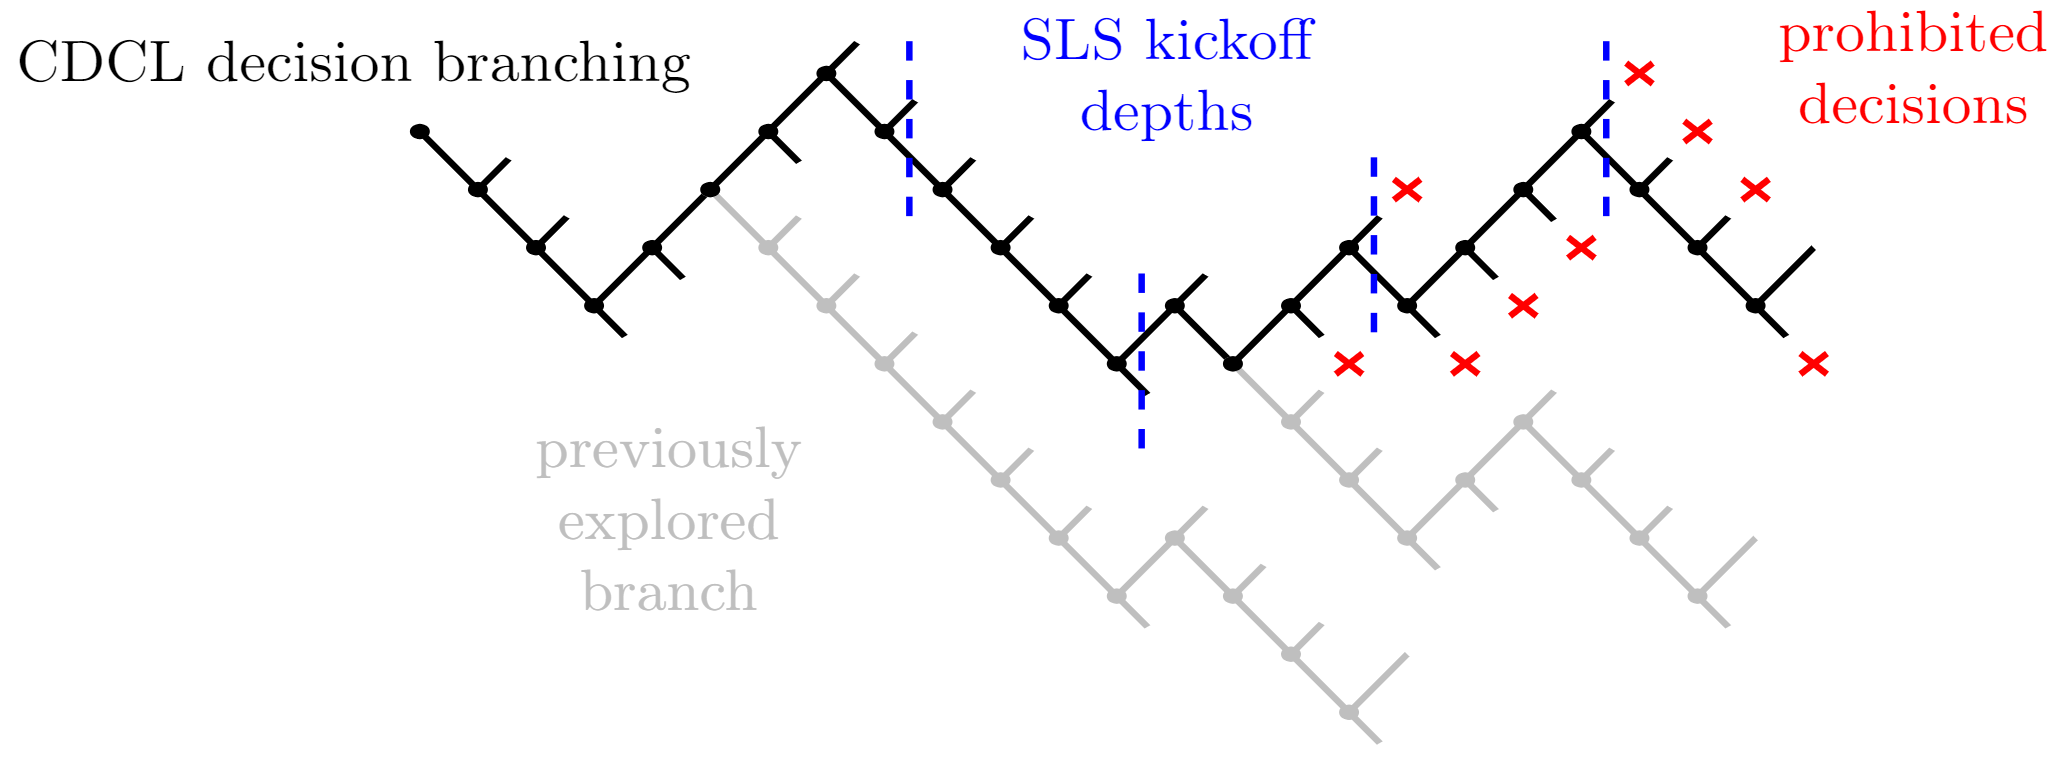 Dagster's branching search: Illustration of worker backtracking search with SLS suggestion processes set to work constrained from partial assignments at various depths in the search branch (blue dashed lines), shown are previously explored branches (gray) and prohibited decisions arising from conflicts (red crosses)